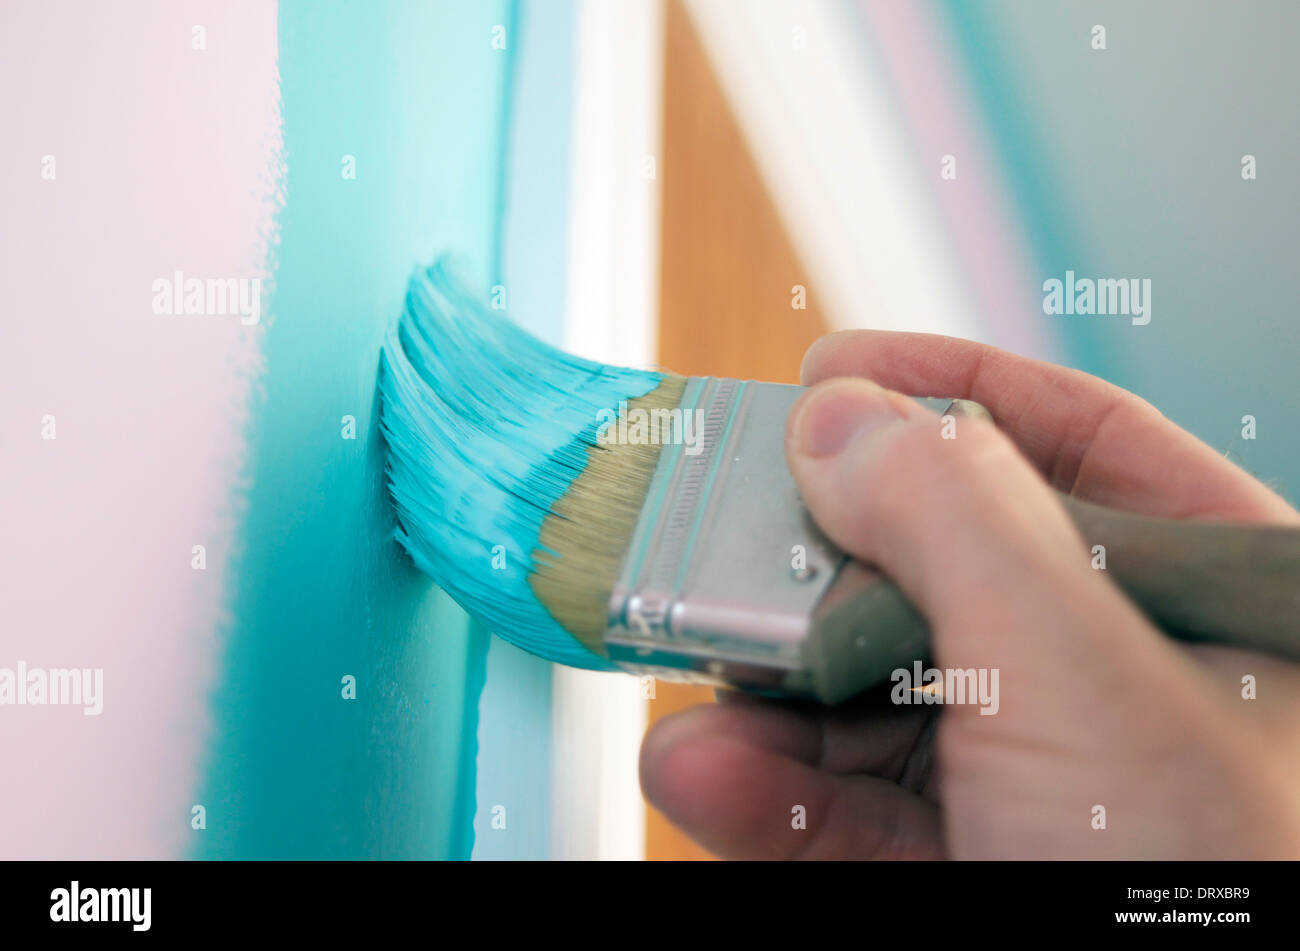 Hand holding paintbrush with turquoise paint painting a wall. Stock Photo